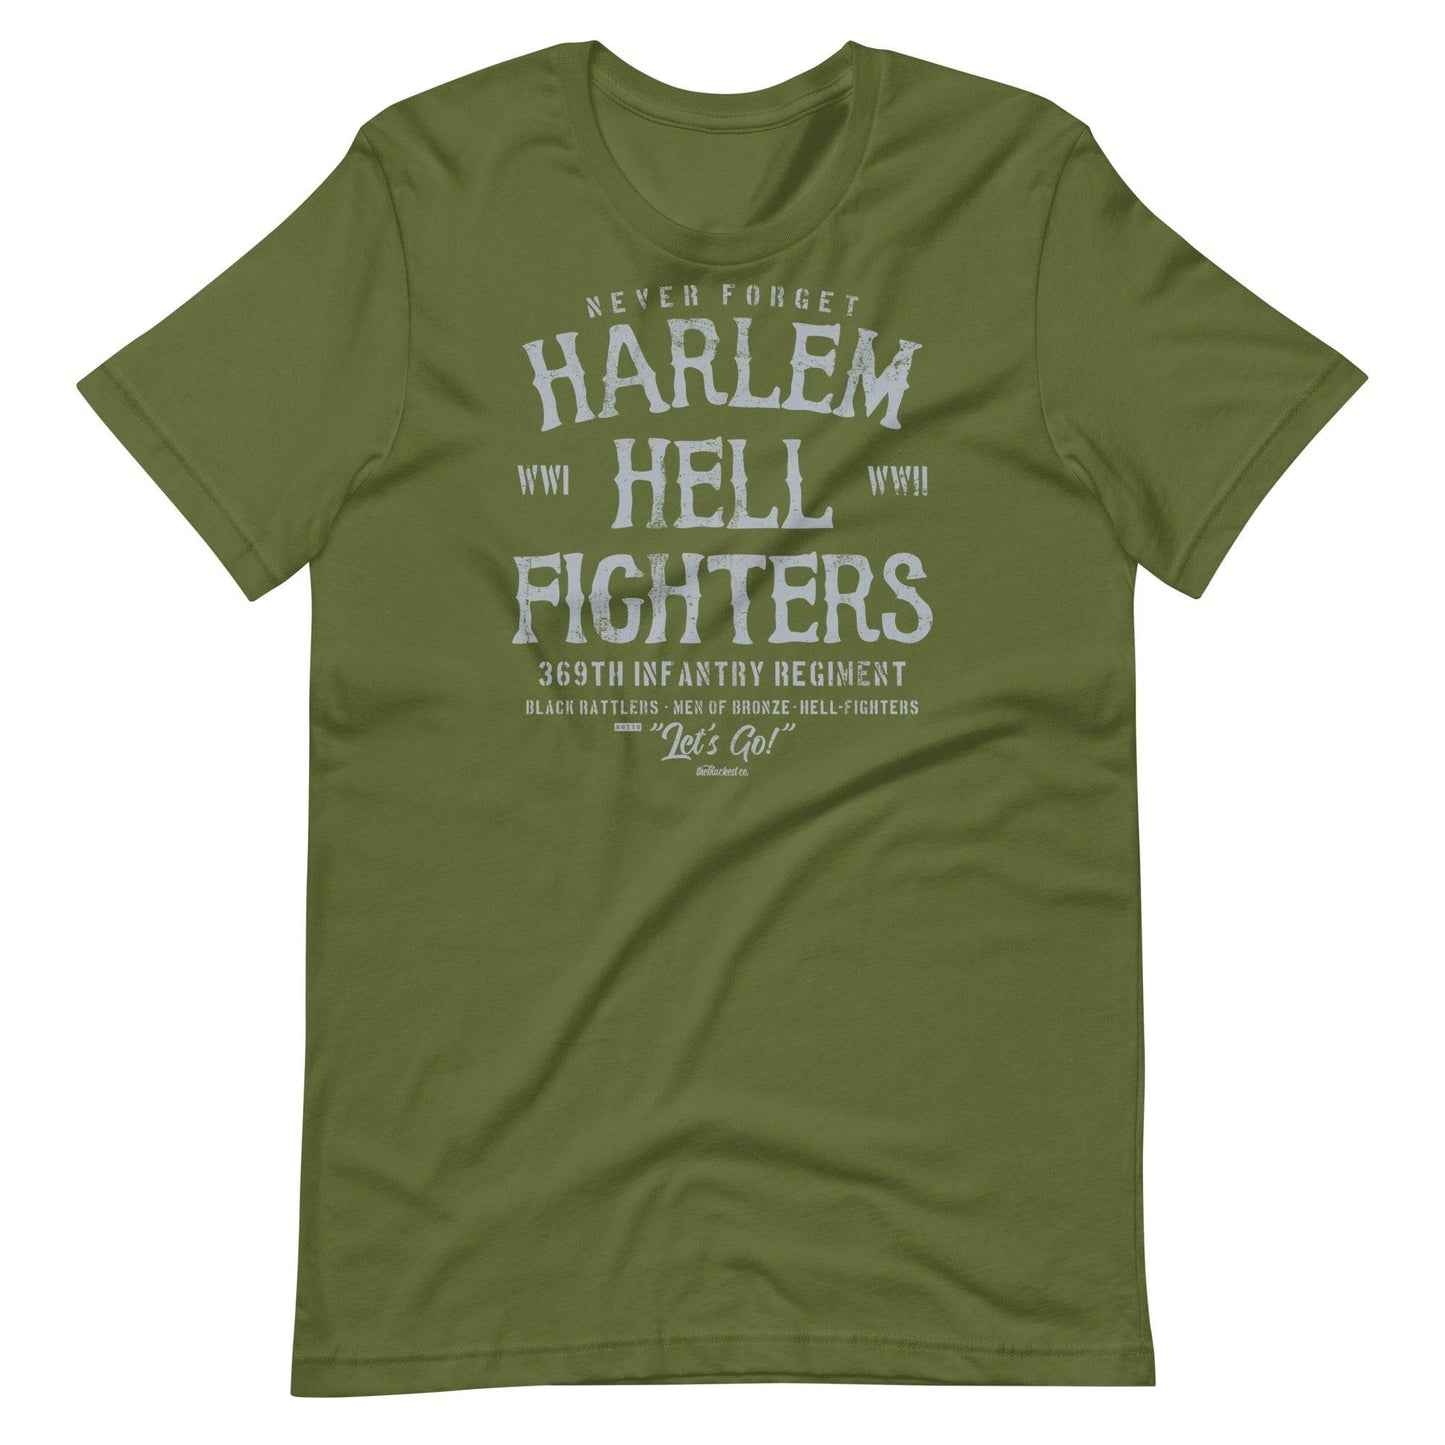 spruce green t shirt with white text that reads harlem hellfighters wwi and wwii